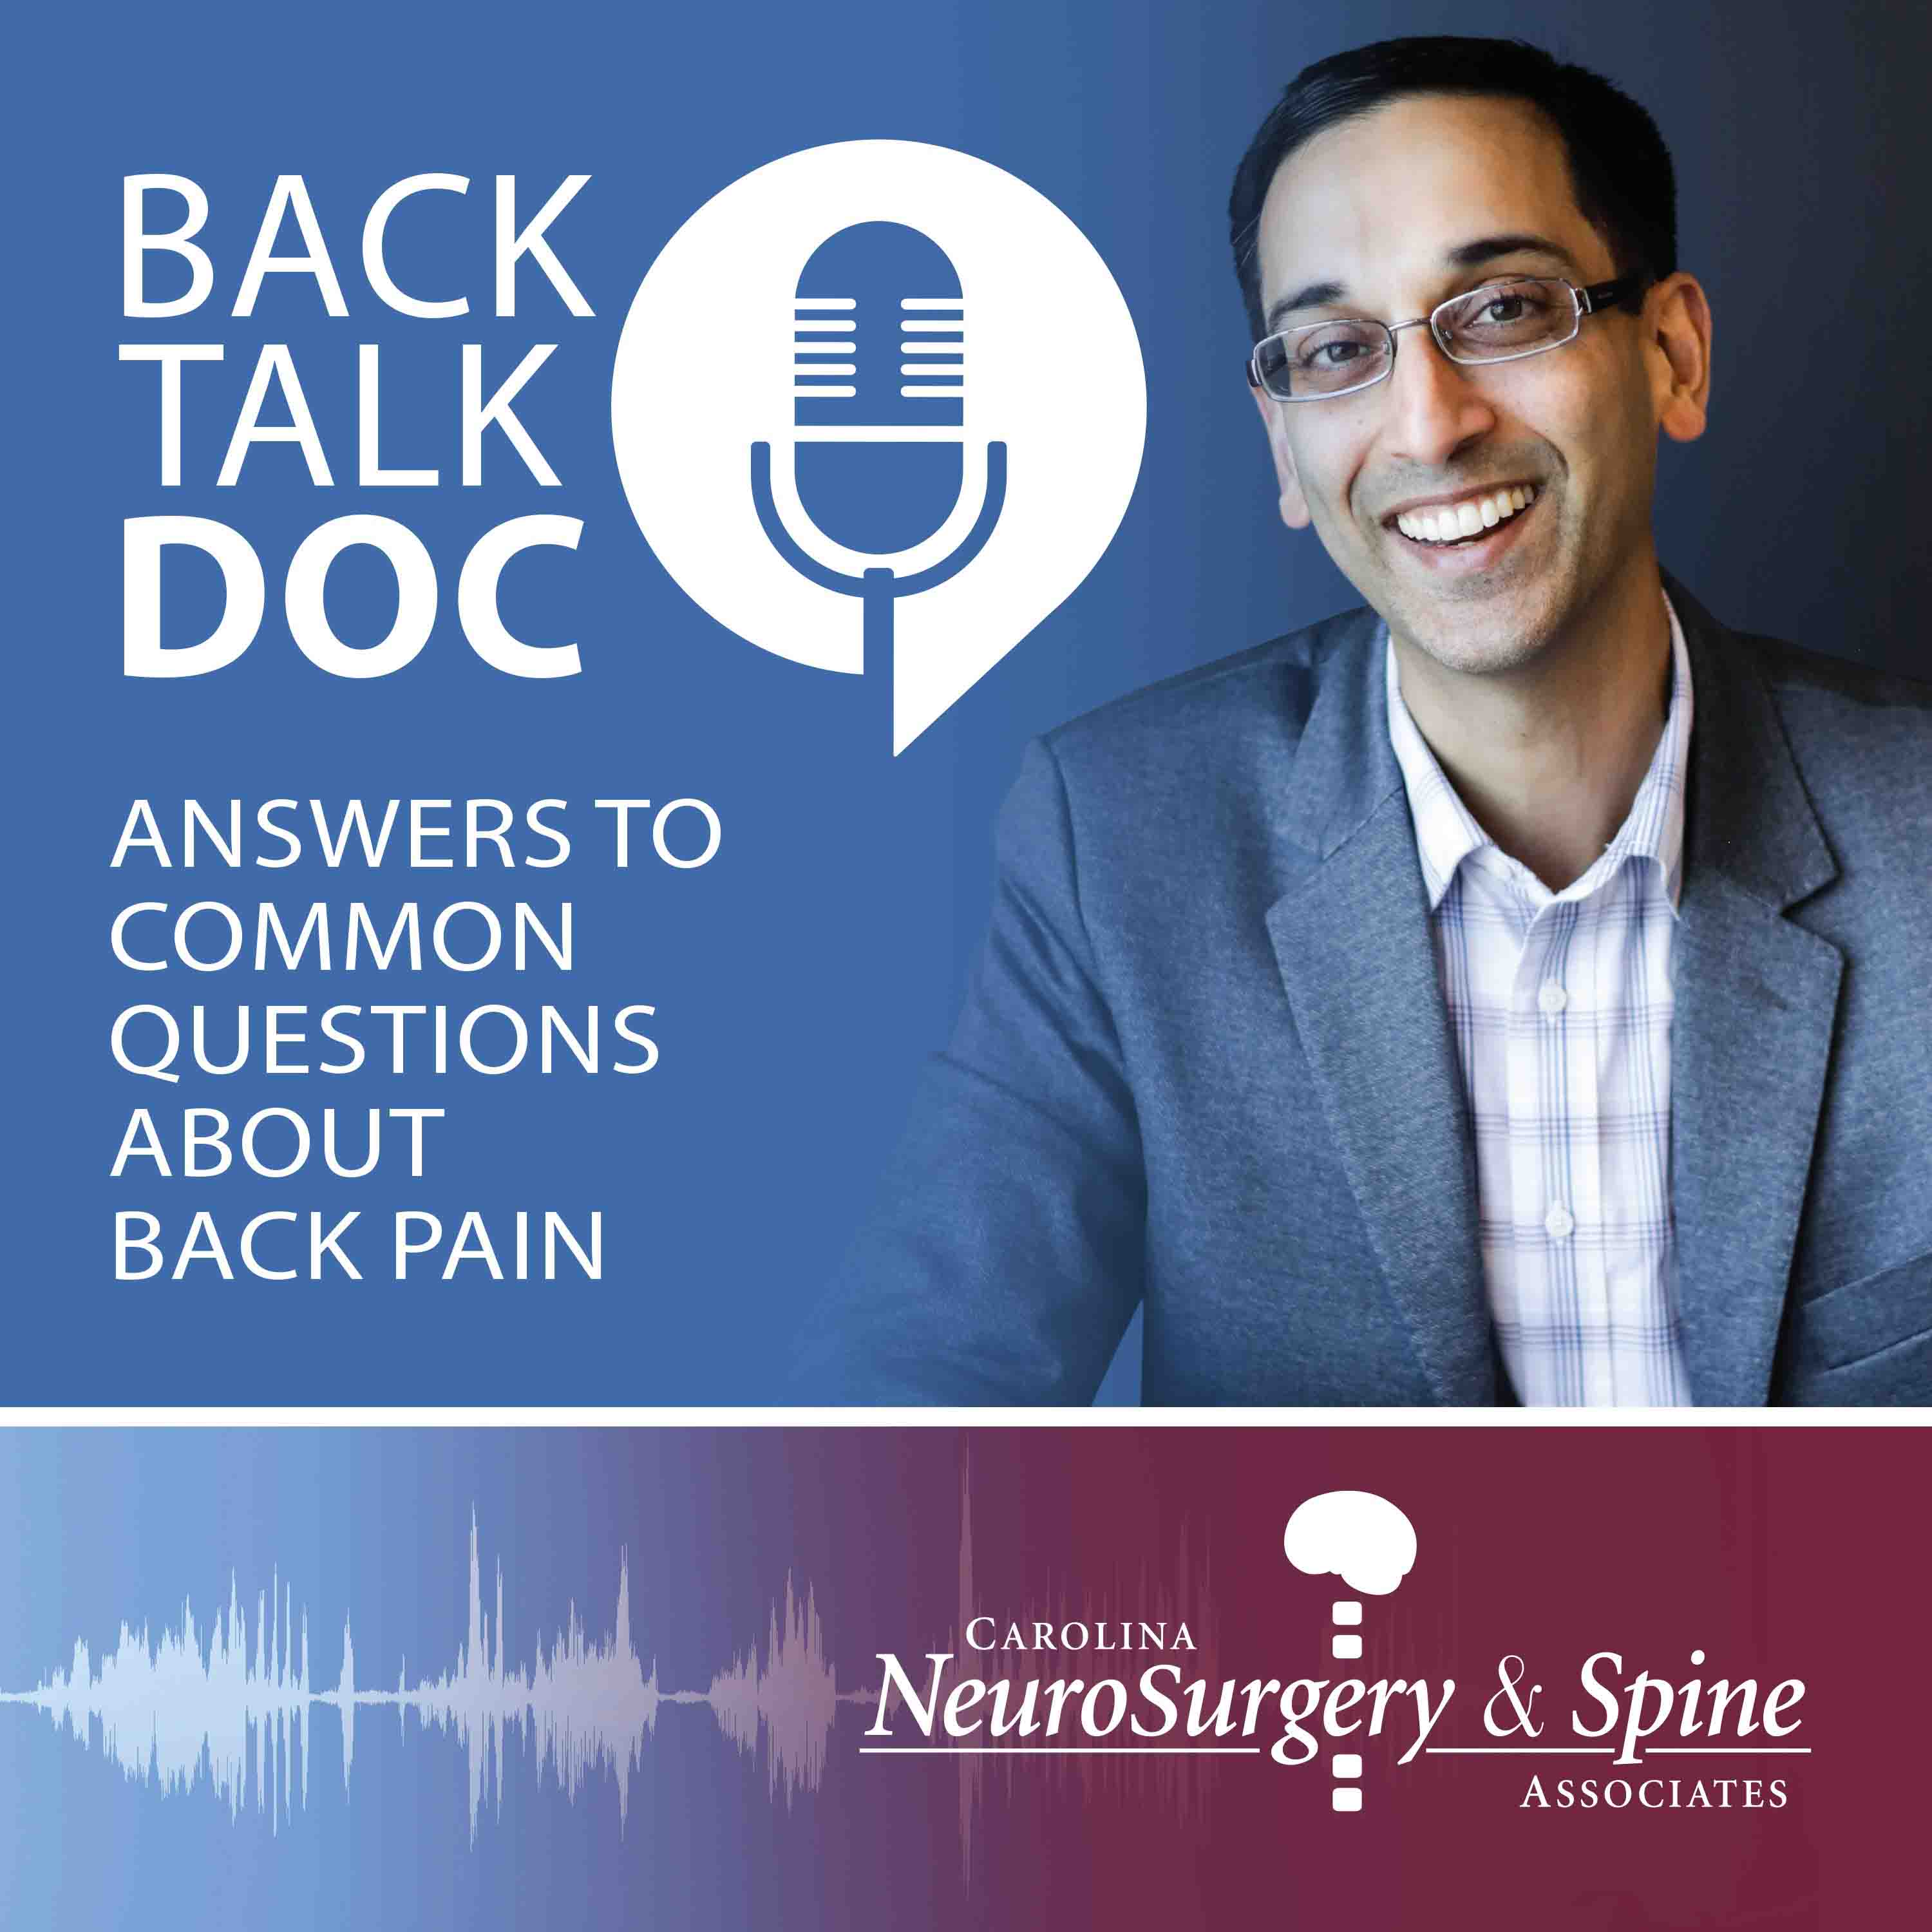 All About Radiofrequency Ablation for Spinal Arthritis With Dr. Stephanie Plummer